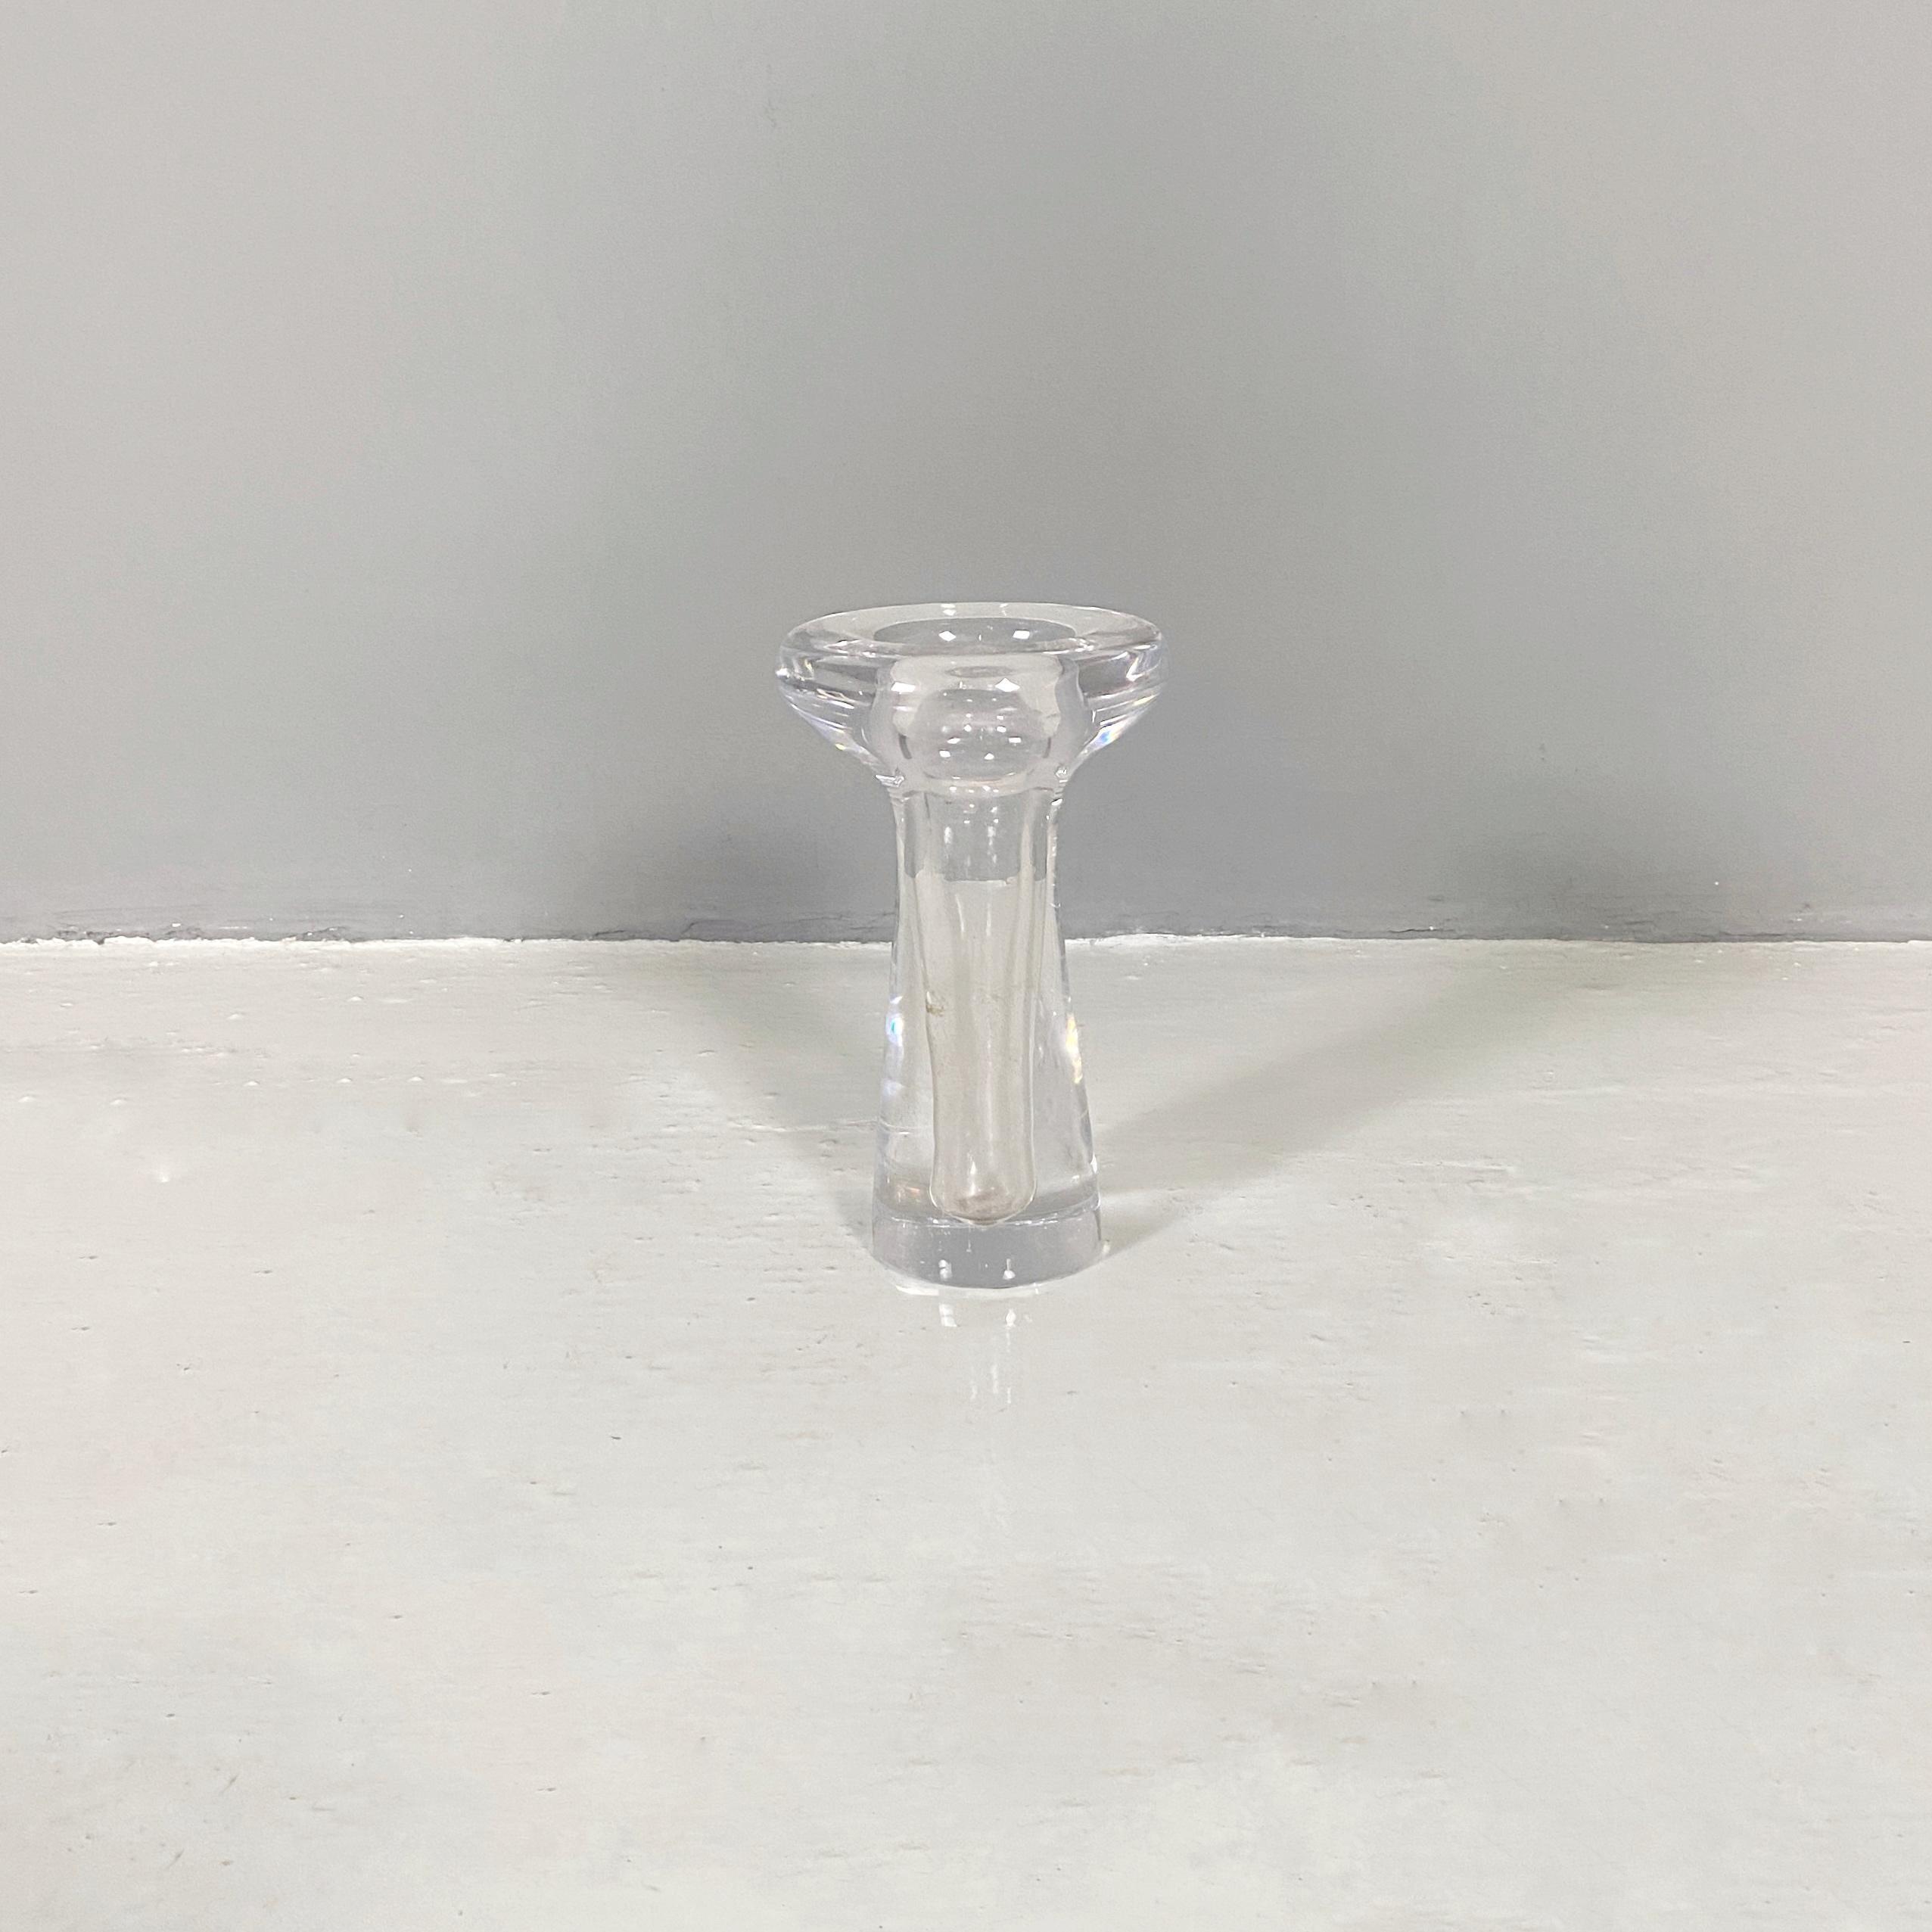 Italian Mid-Century Modern Glass flower vase, 1960s.
Flower vase in transparent glass with round shapes.
1960s

Good conditions

Measurements in cm 13x22H.